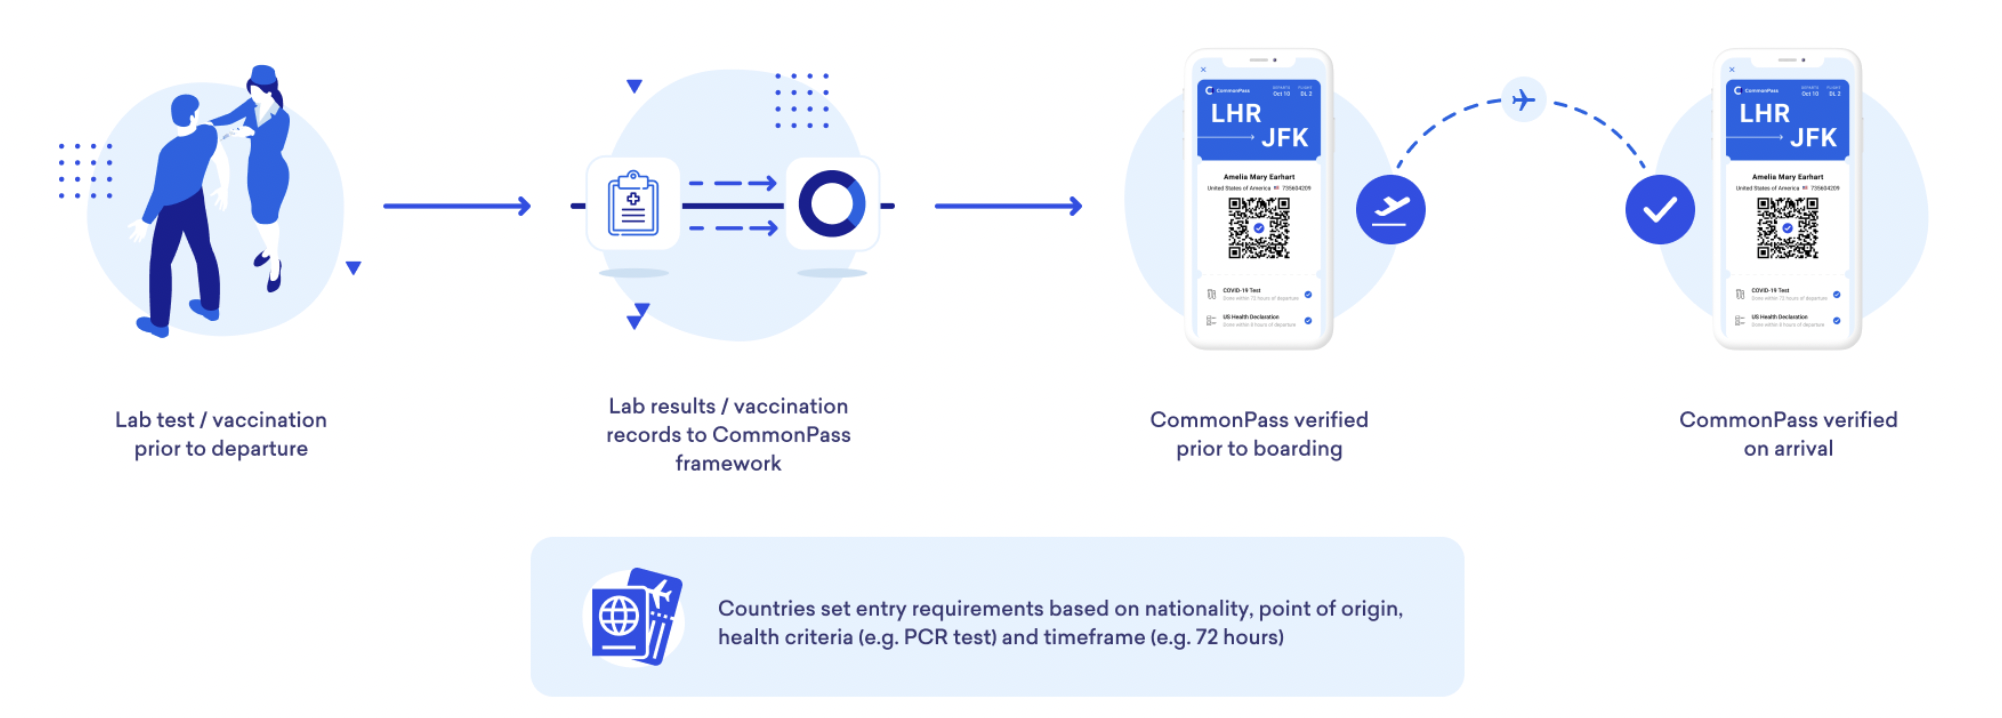 CommonPass verified prior to onboarding